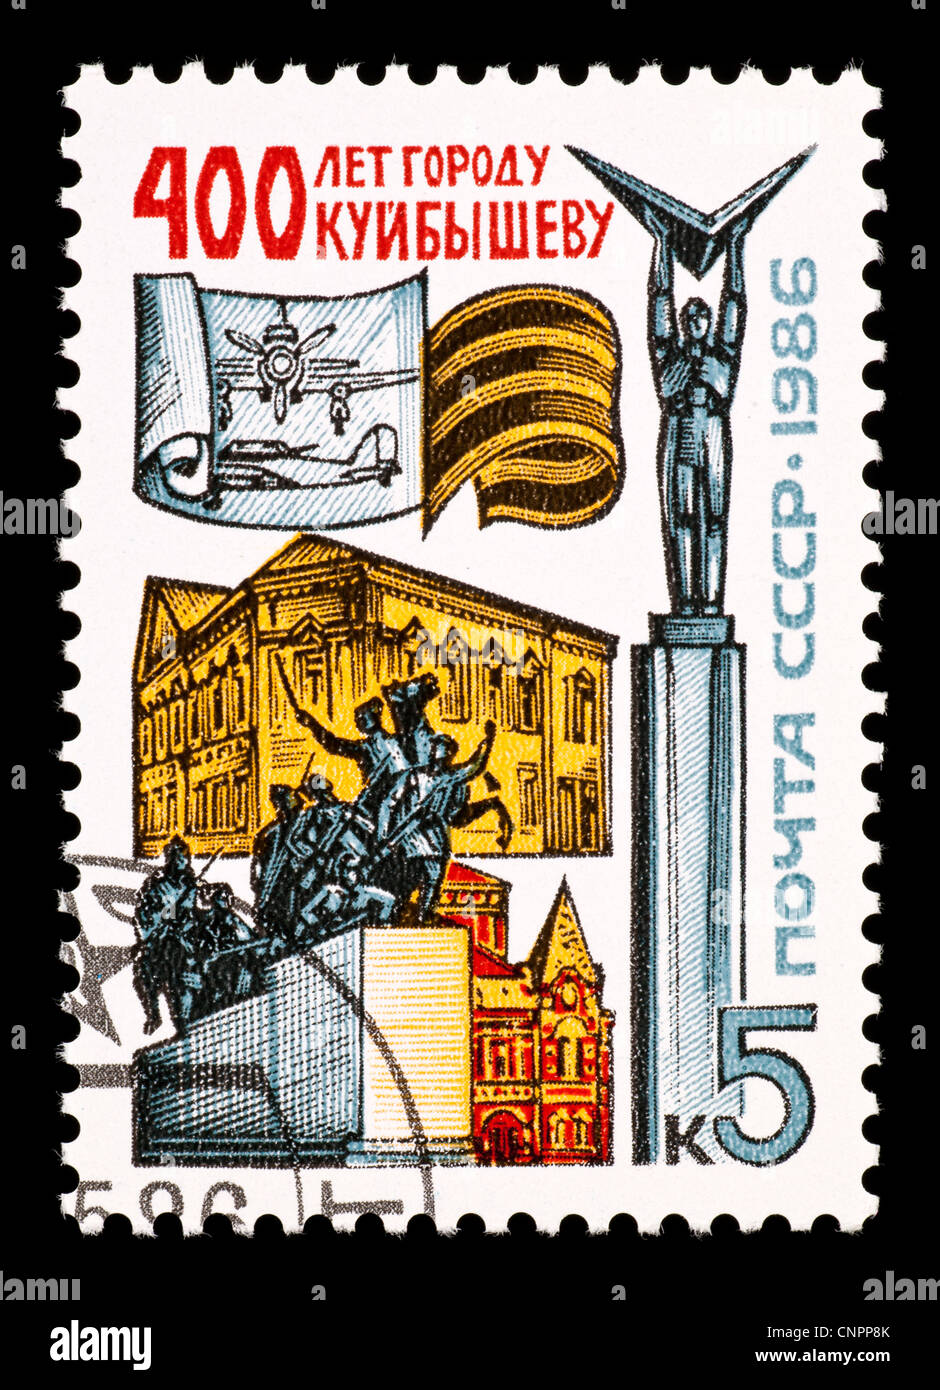 Postage stamp from the Soviet Union for the four hundredth anniversary of Kuibyshev and local sites. Stock Photo